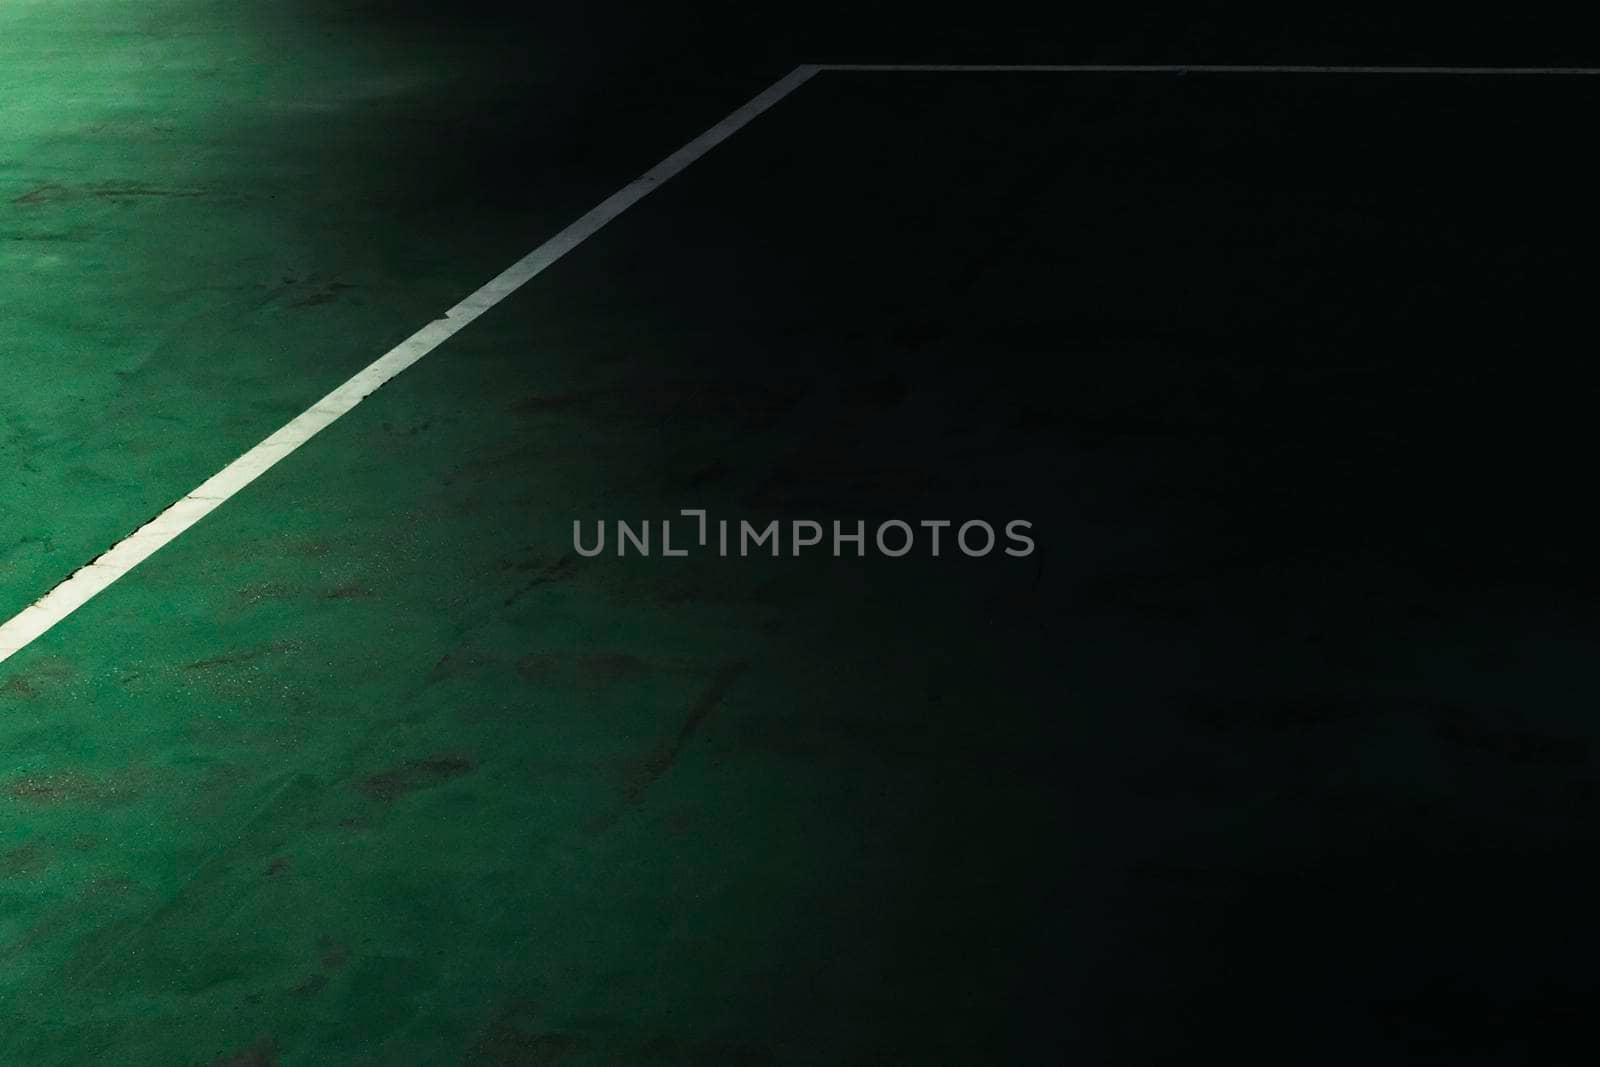 Abstract background with white line and green floor of a tennis field. Light and shadow concept.